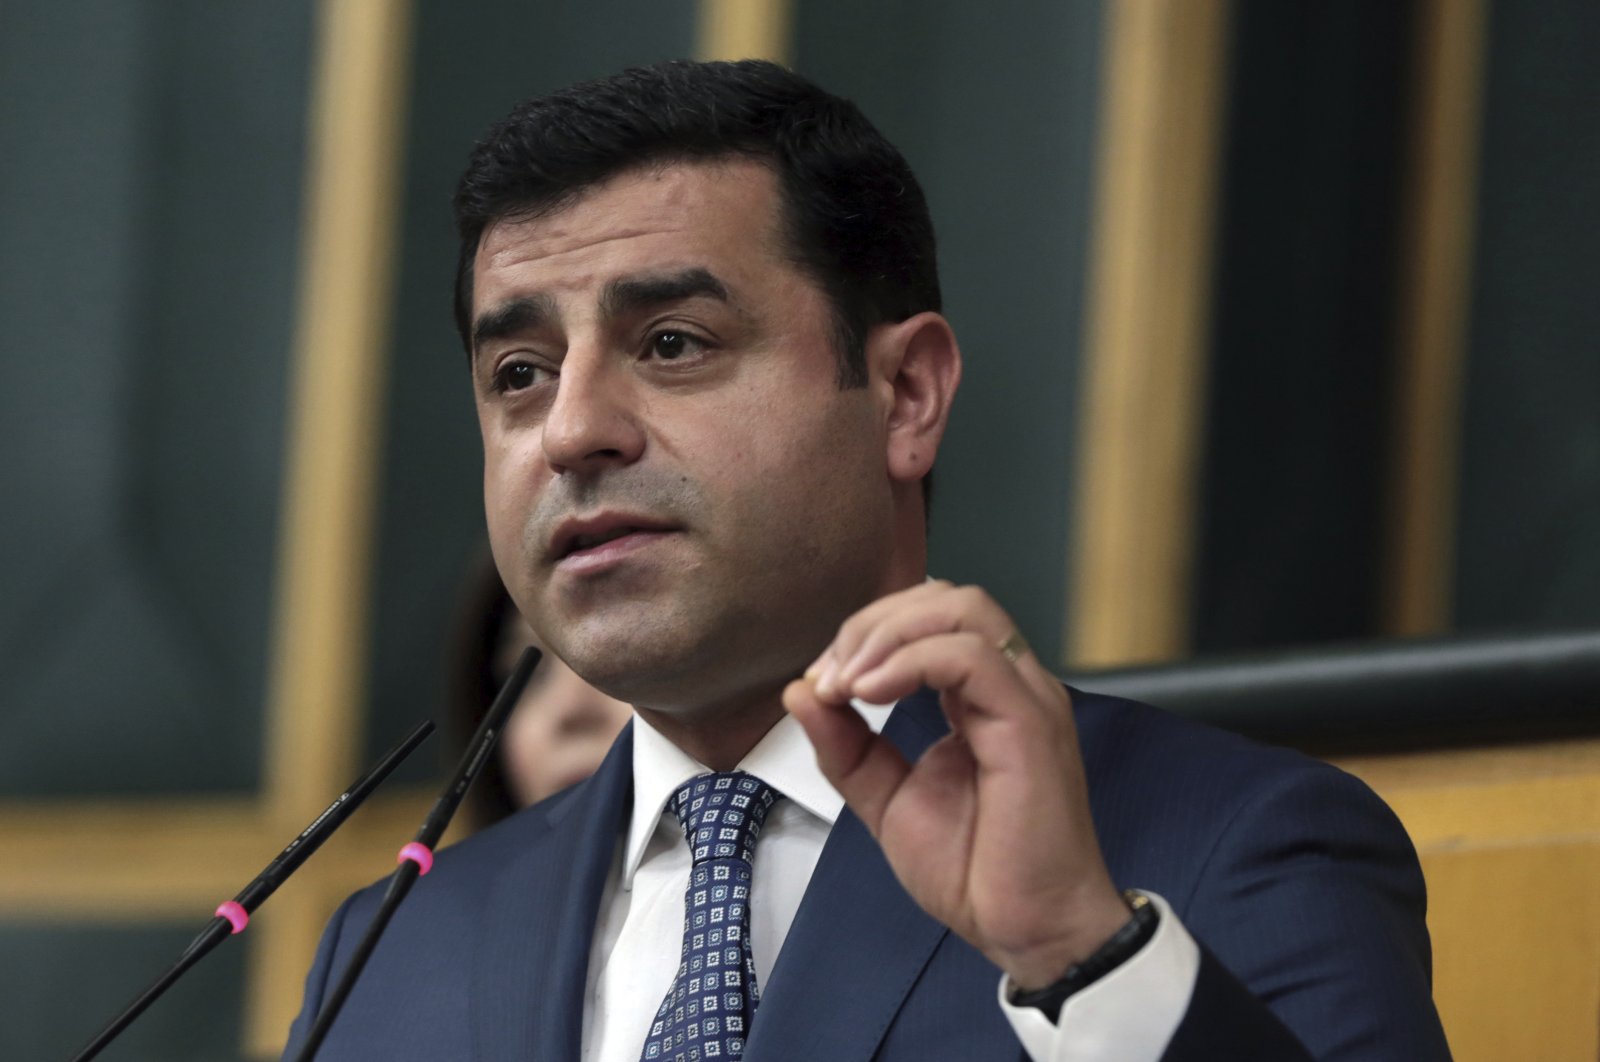 Former co-leader of the pro-PKK Peoples' Democratic Party (HDP) Selahattin Demirtaş speaks at the Parliament in Ankara, Turkey, May 17, 2016. (AP File Photo)